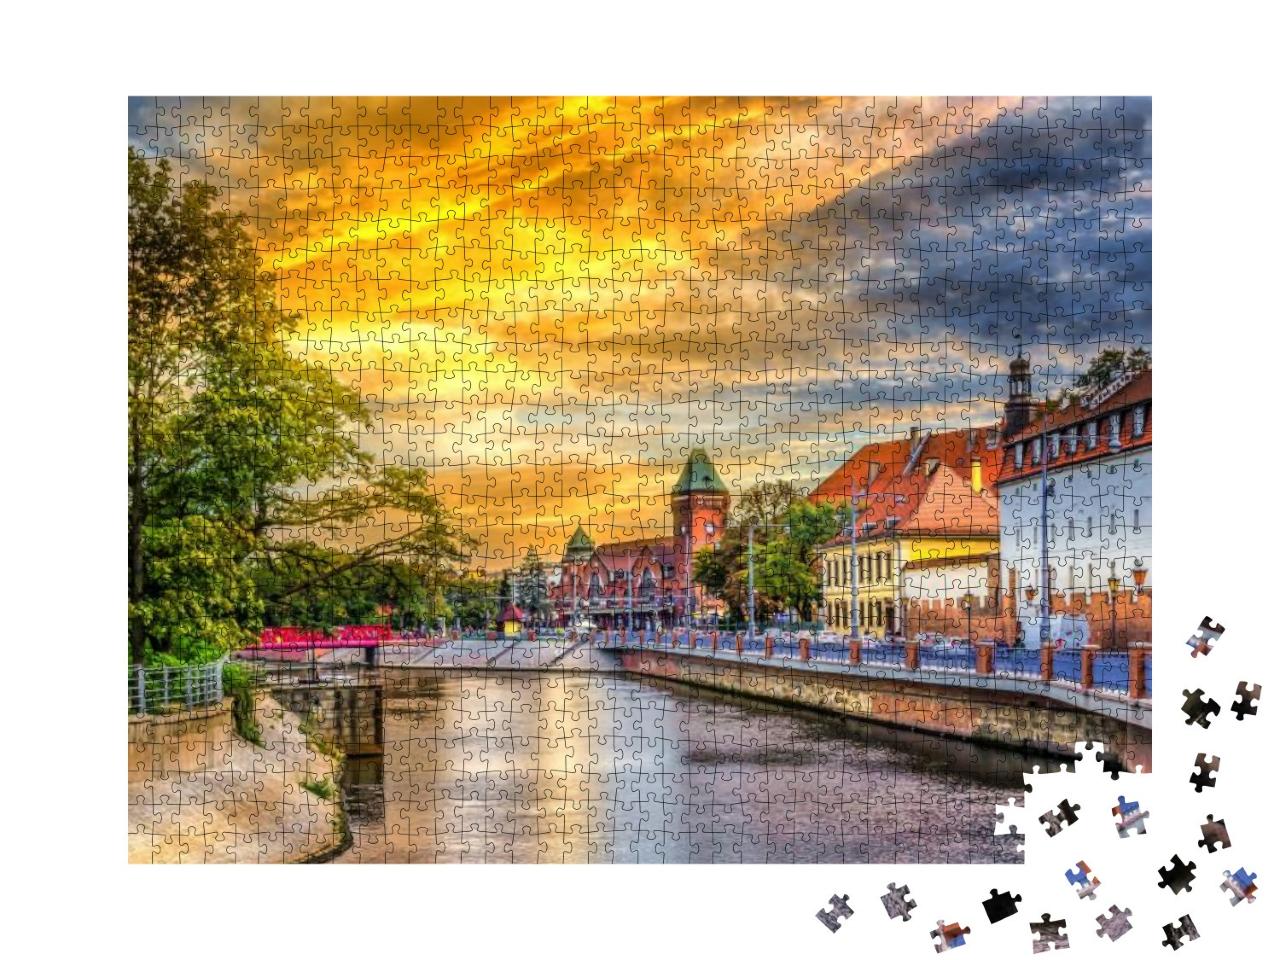 City of Wroclaw in a Sunny Summer, Poland... Jigsaw Puzzle with 1000 pieces